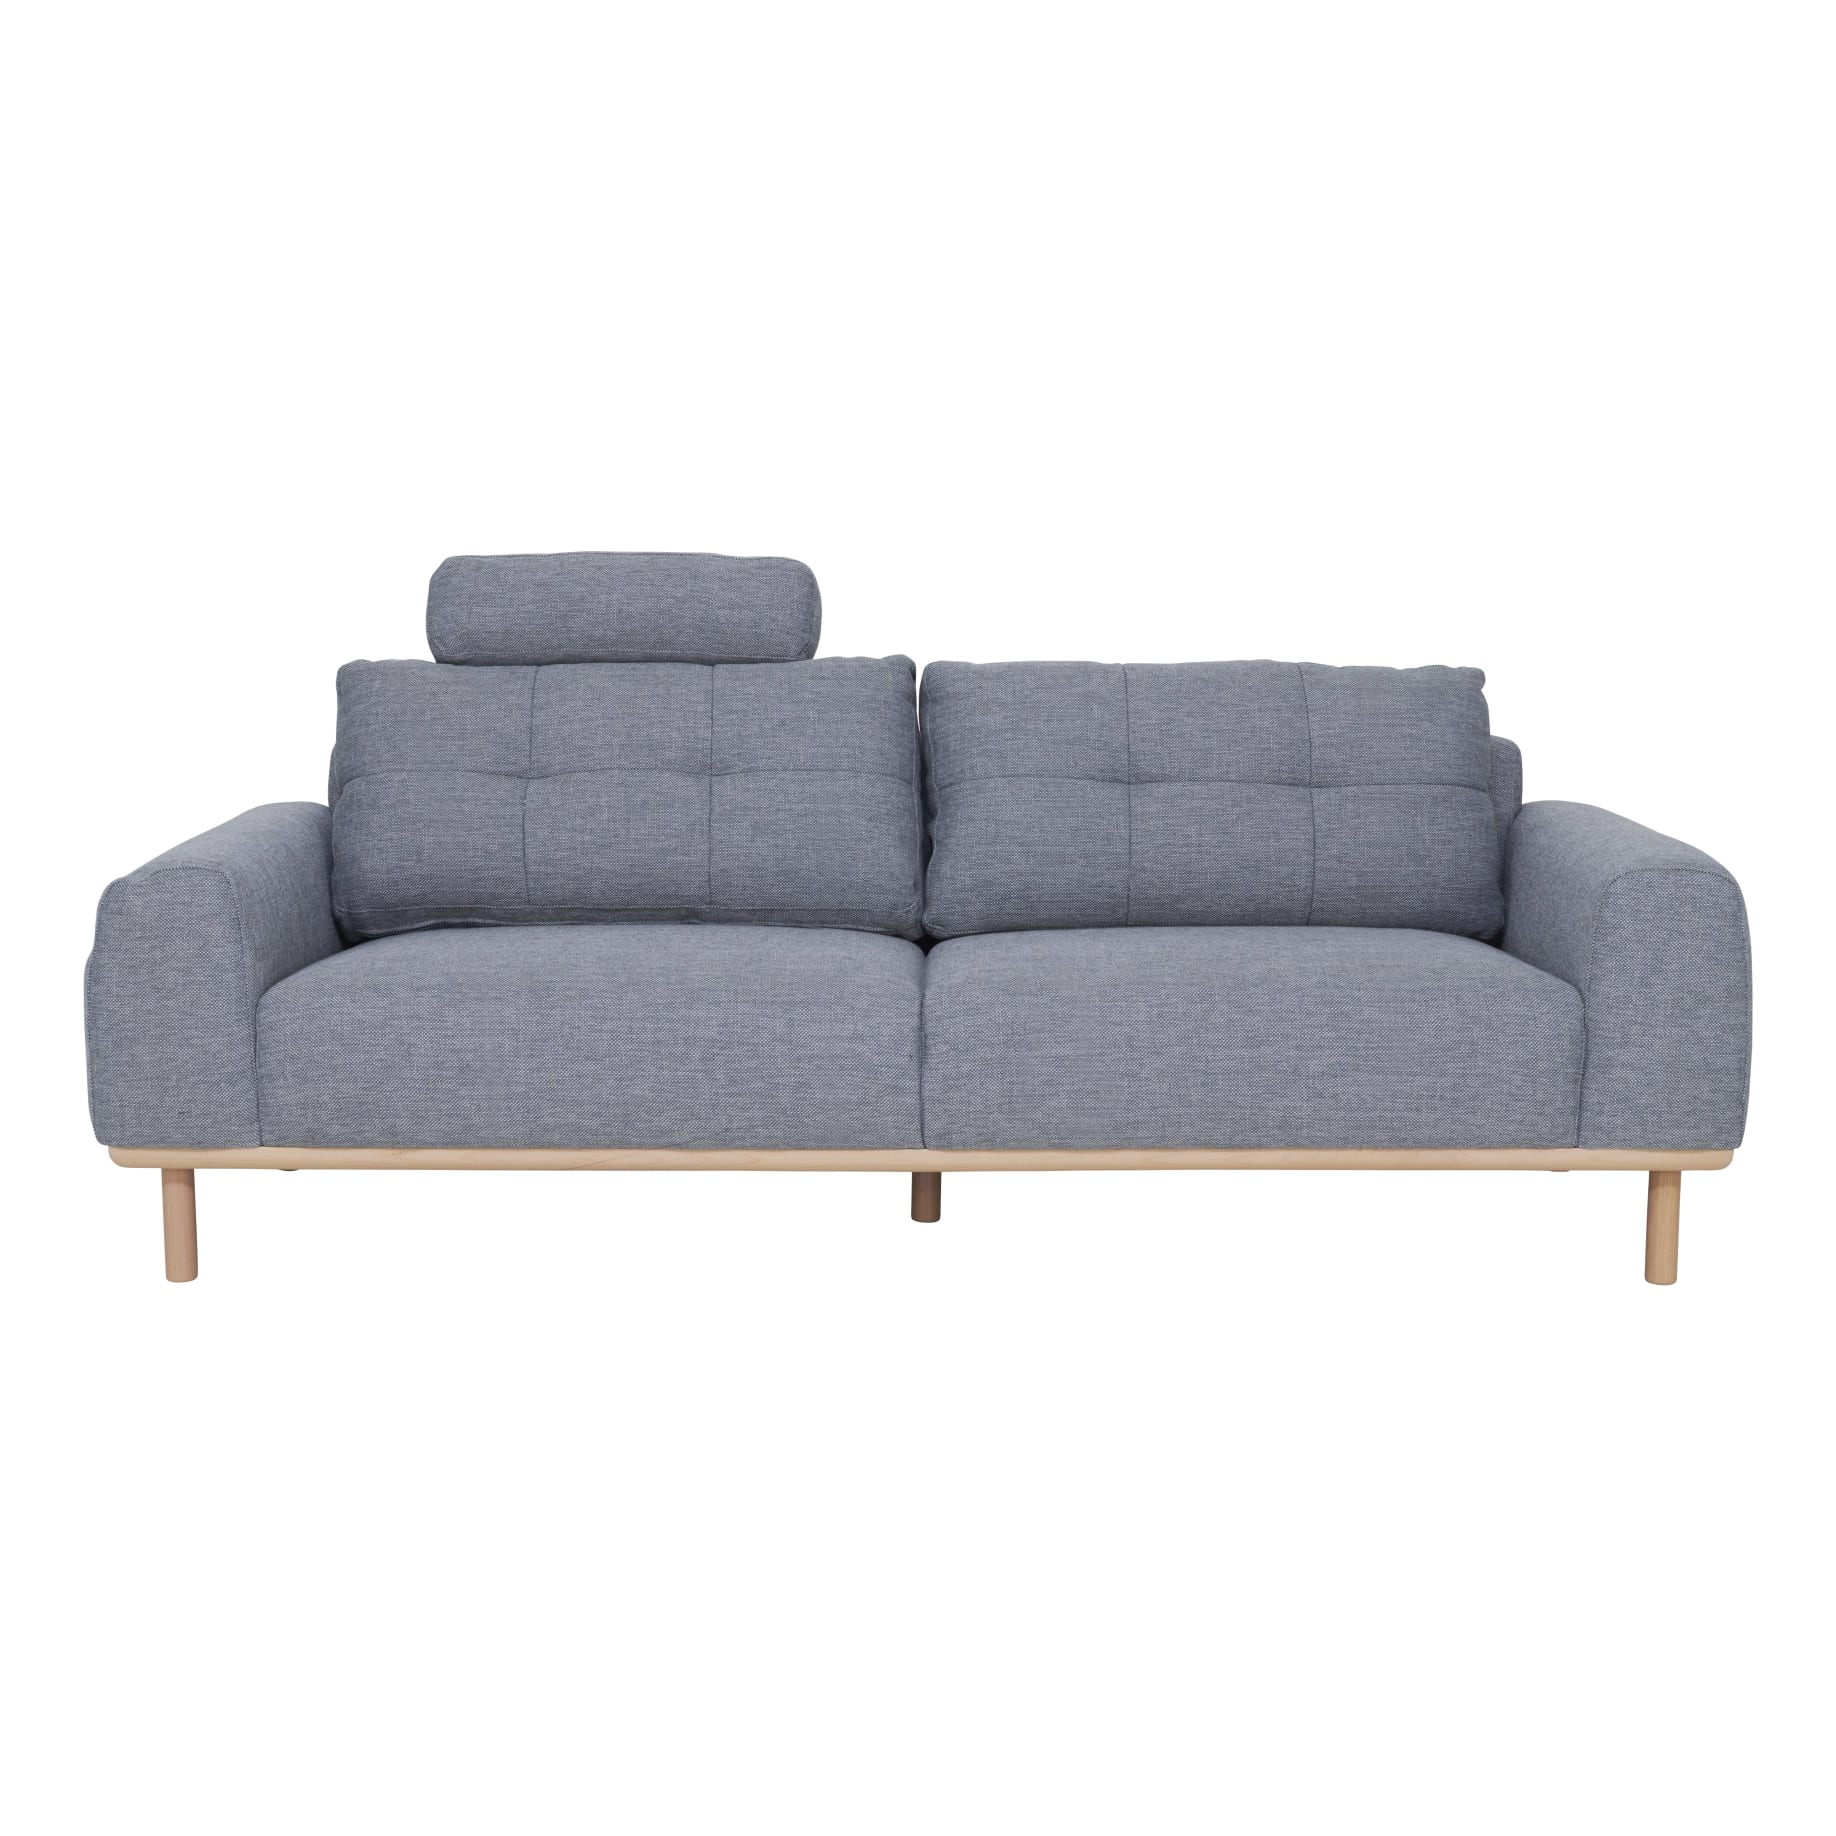 Stratton 3.5 Seater Sofa in Cloud Pewter